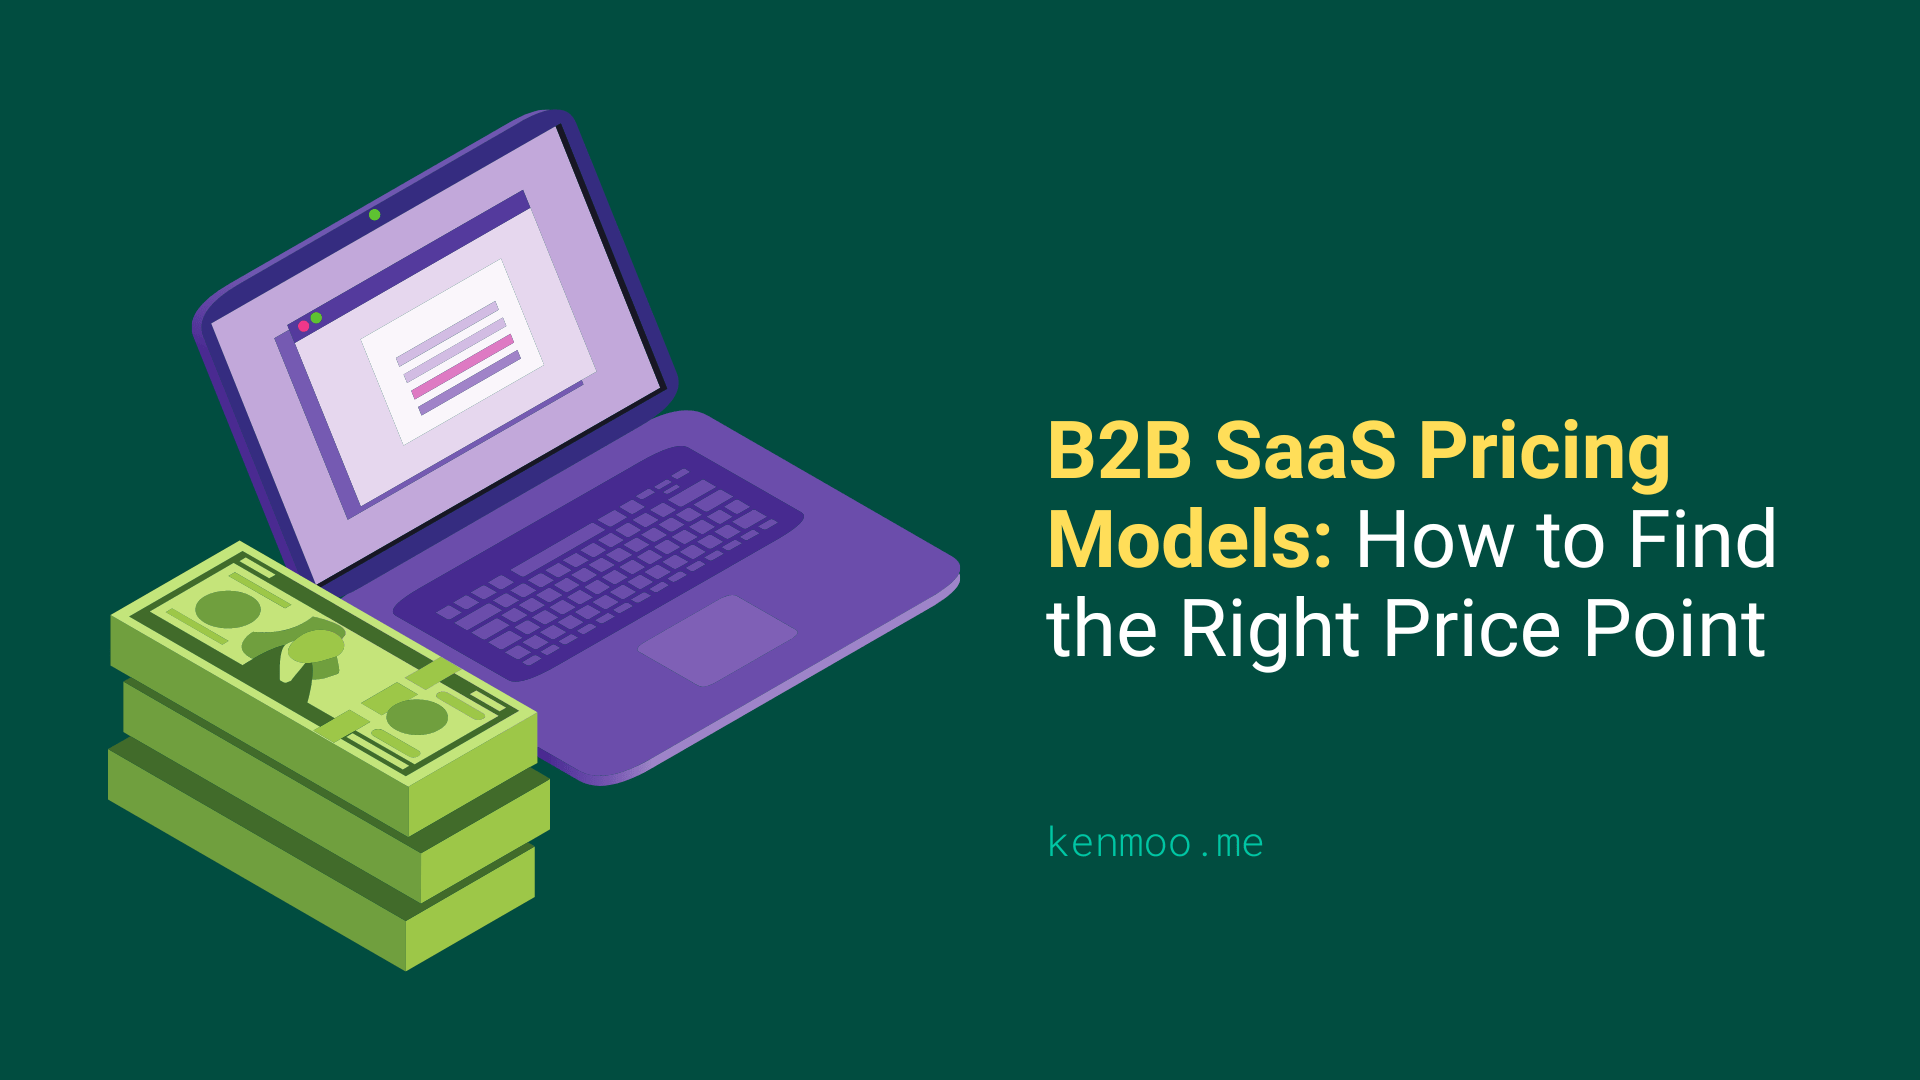 B2B SaaS Pricing Models: Finding the Right Price Point